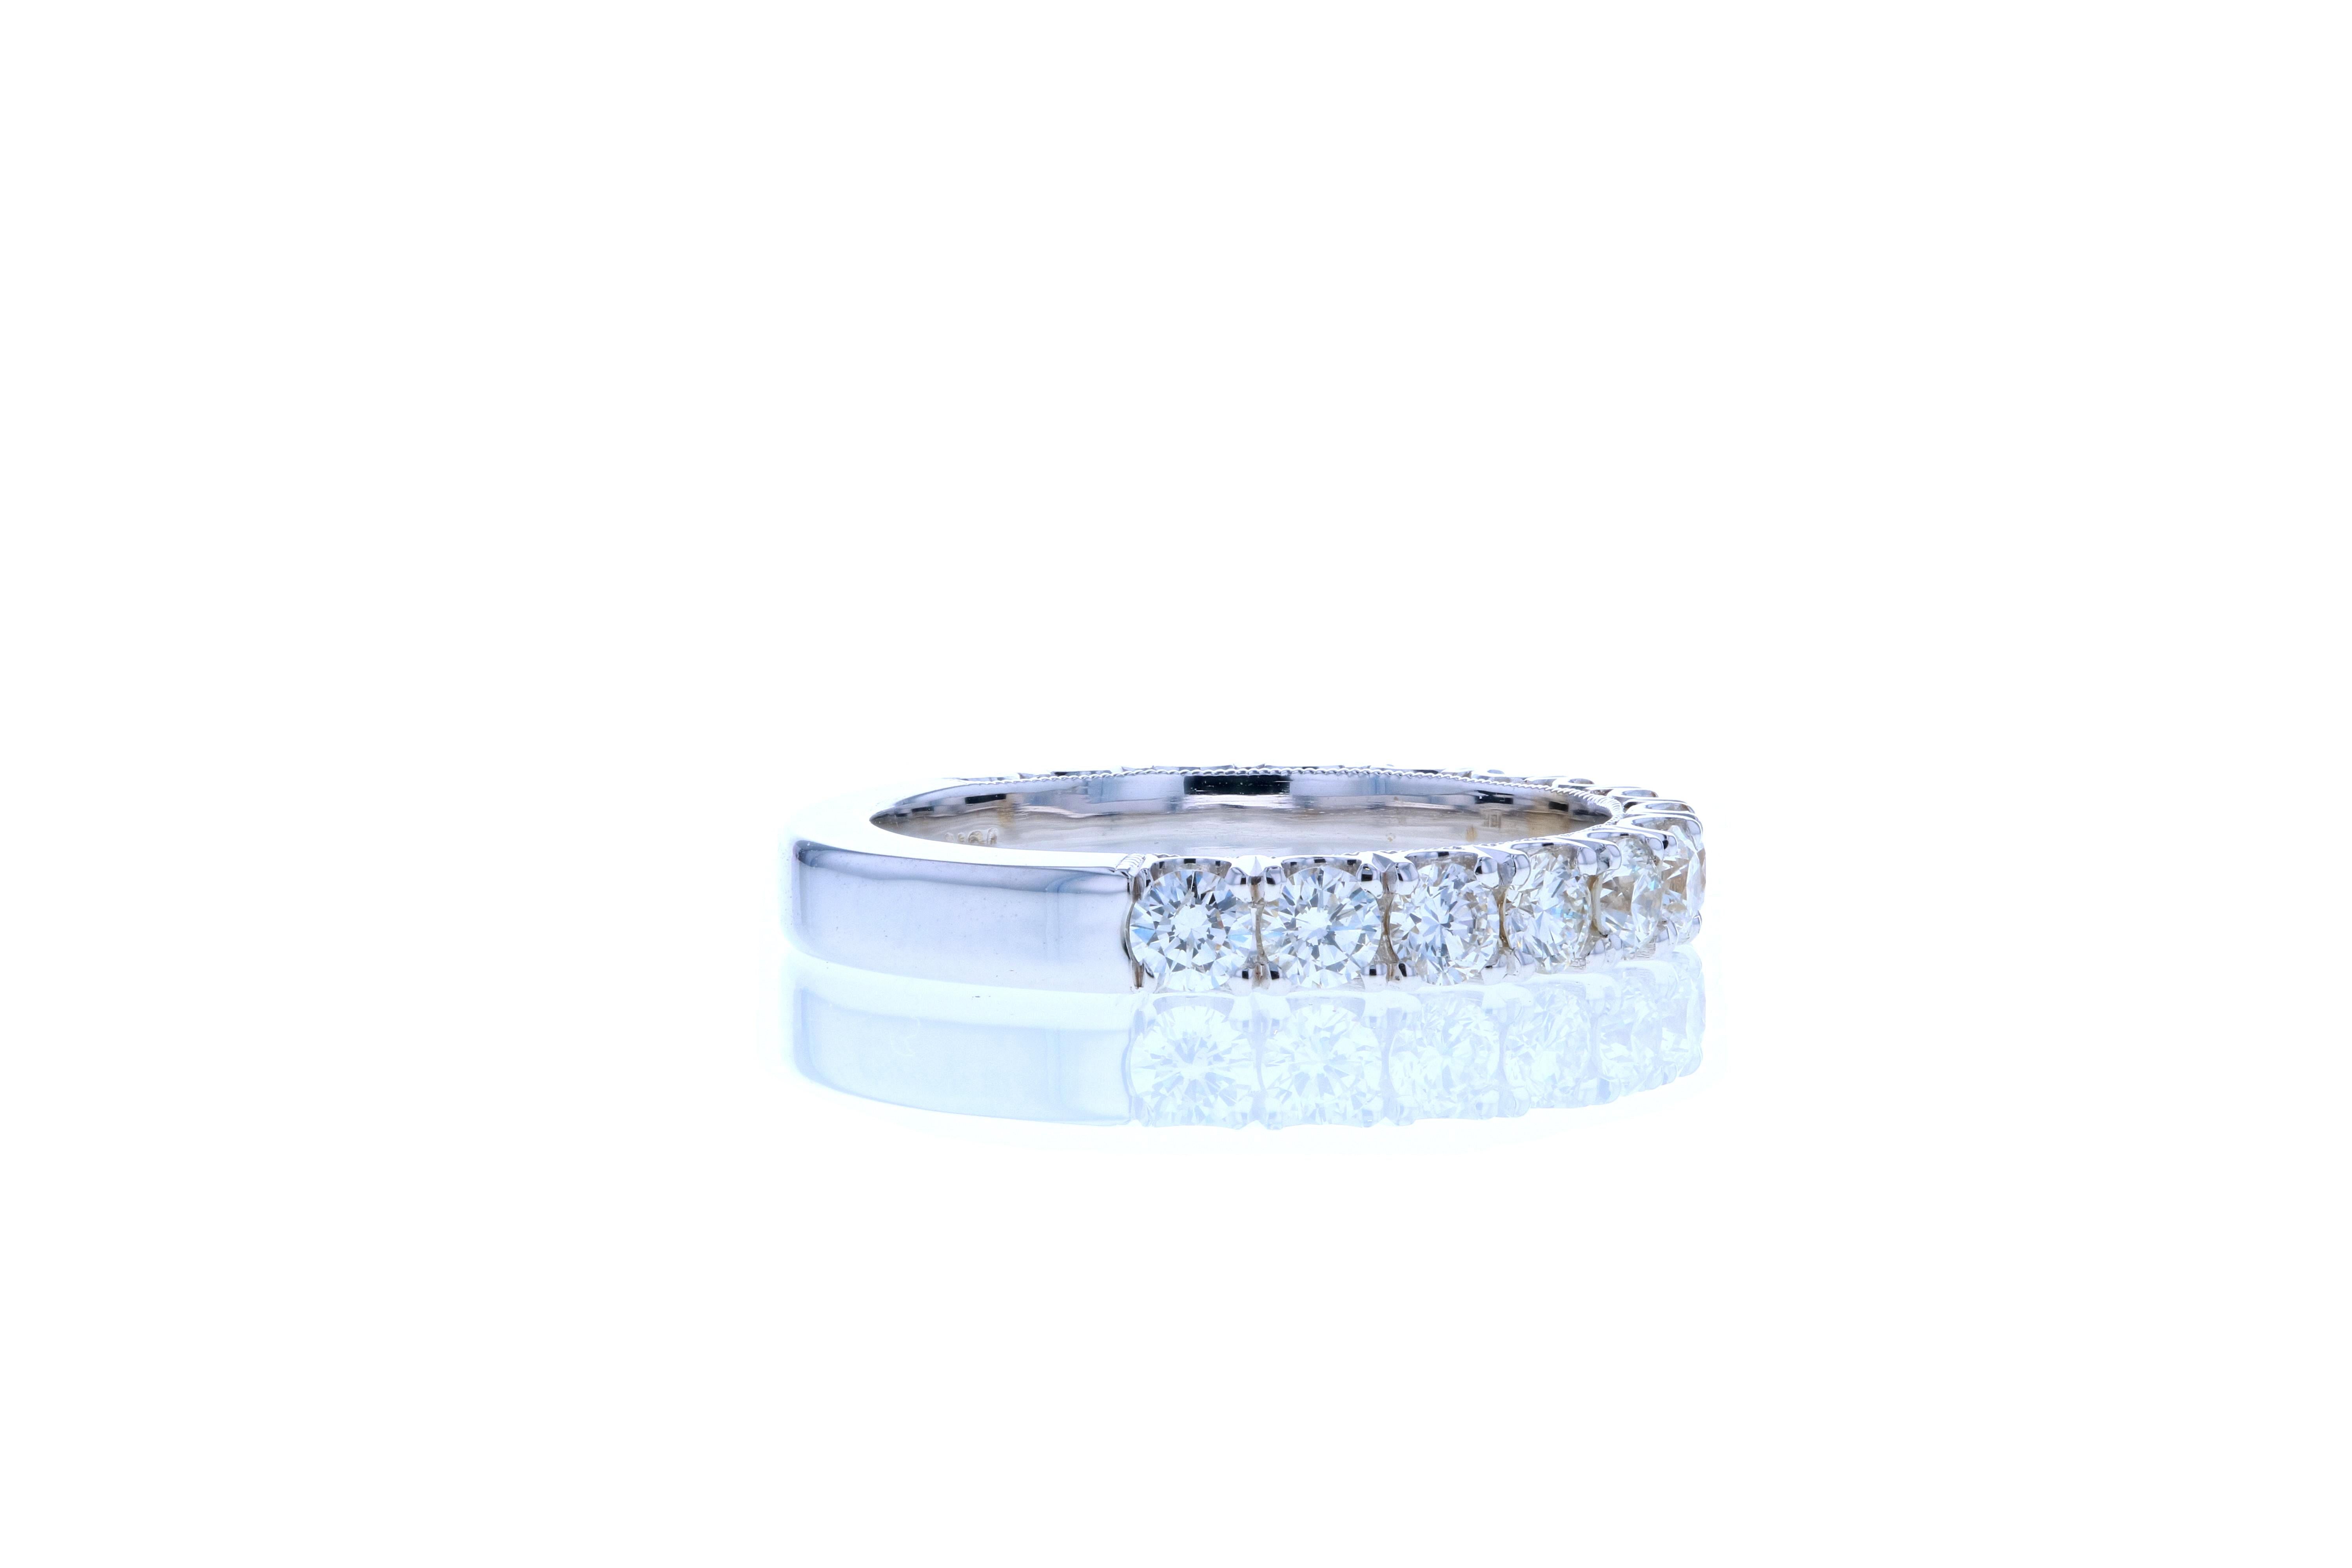 This classic diamond wedding band features larger than normal size diamonds to elevate the look. It features 15 round brilliant cut diamonds and is set in 18K white gold. This style of wedding band can be made in any color metal and with larger or